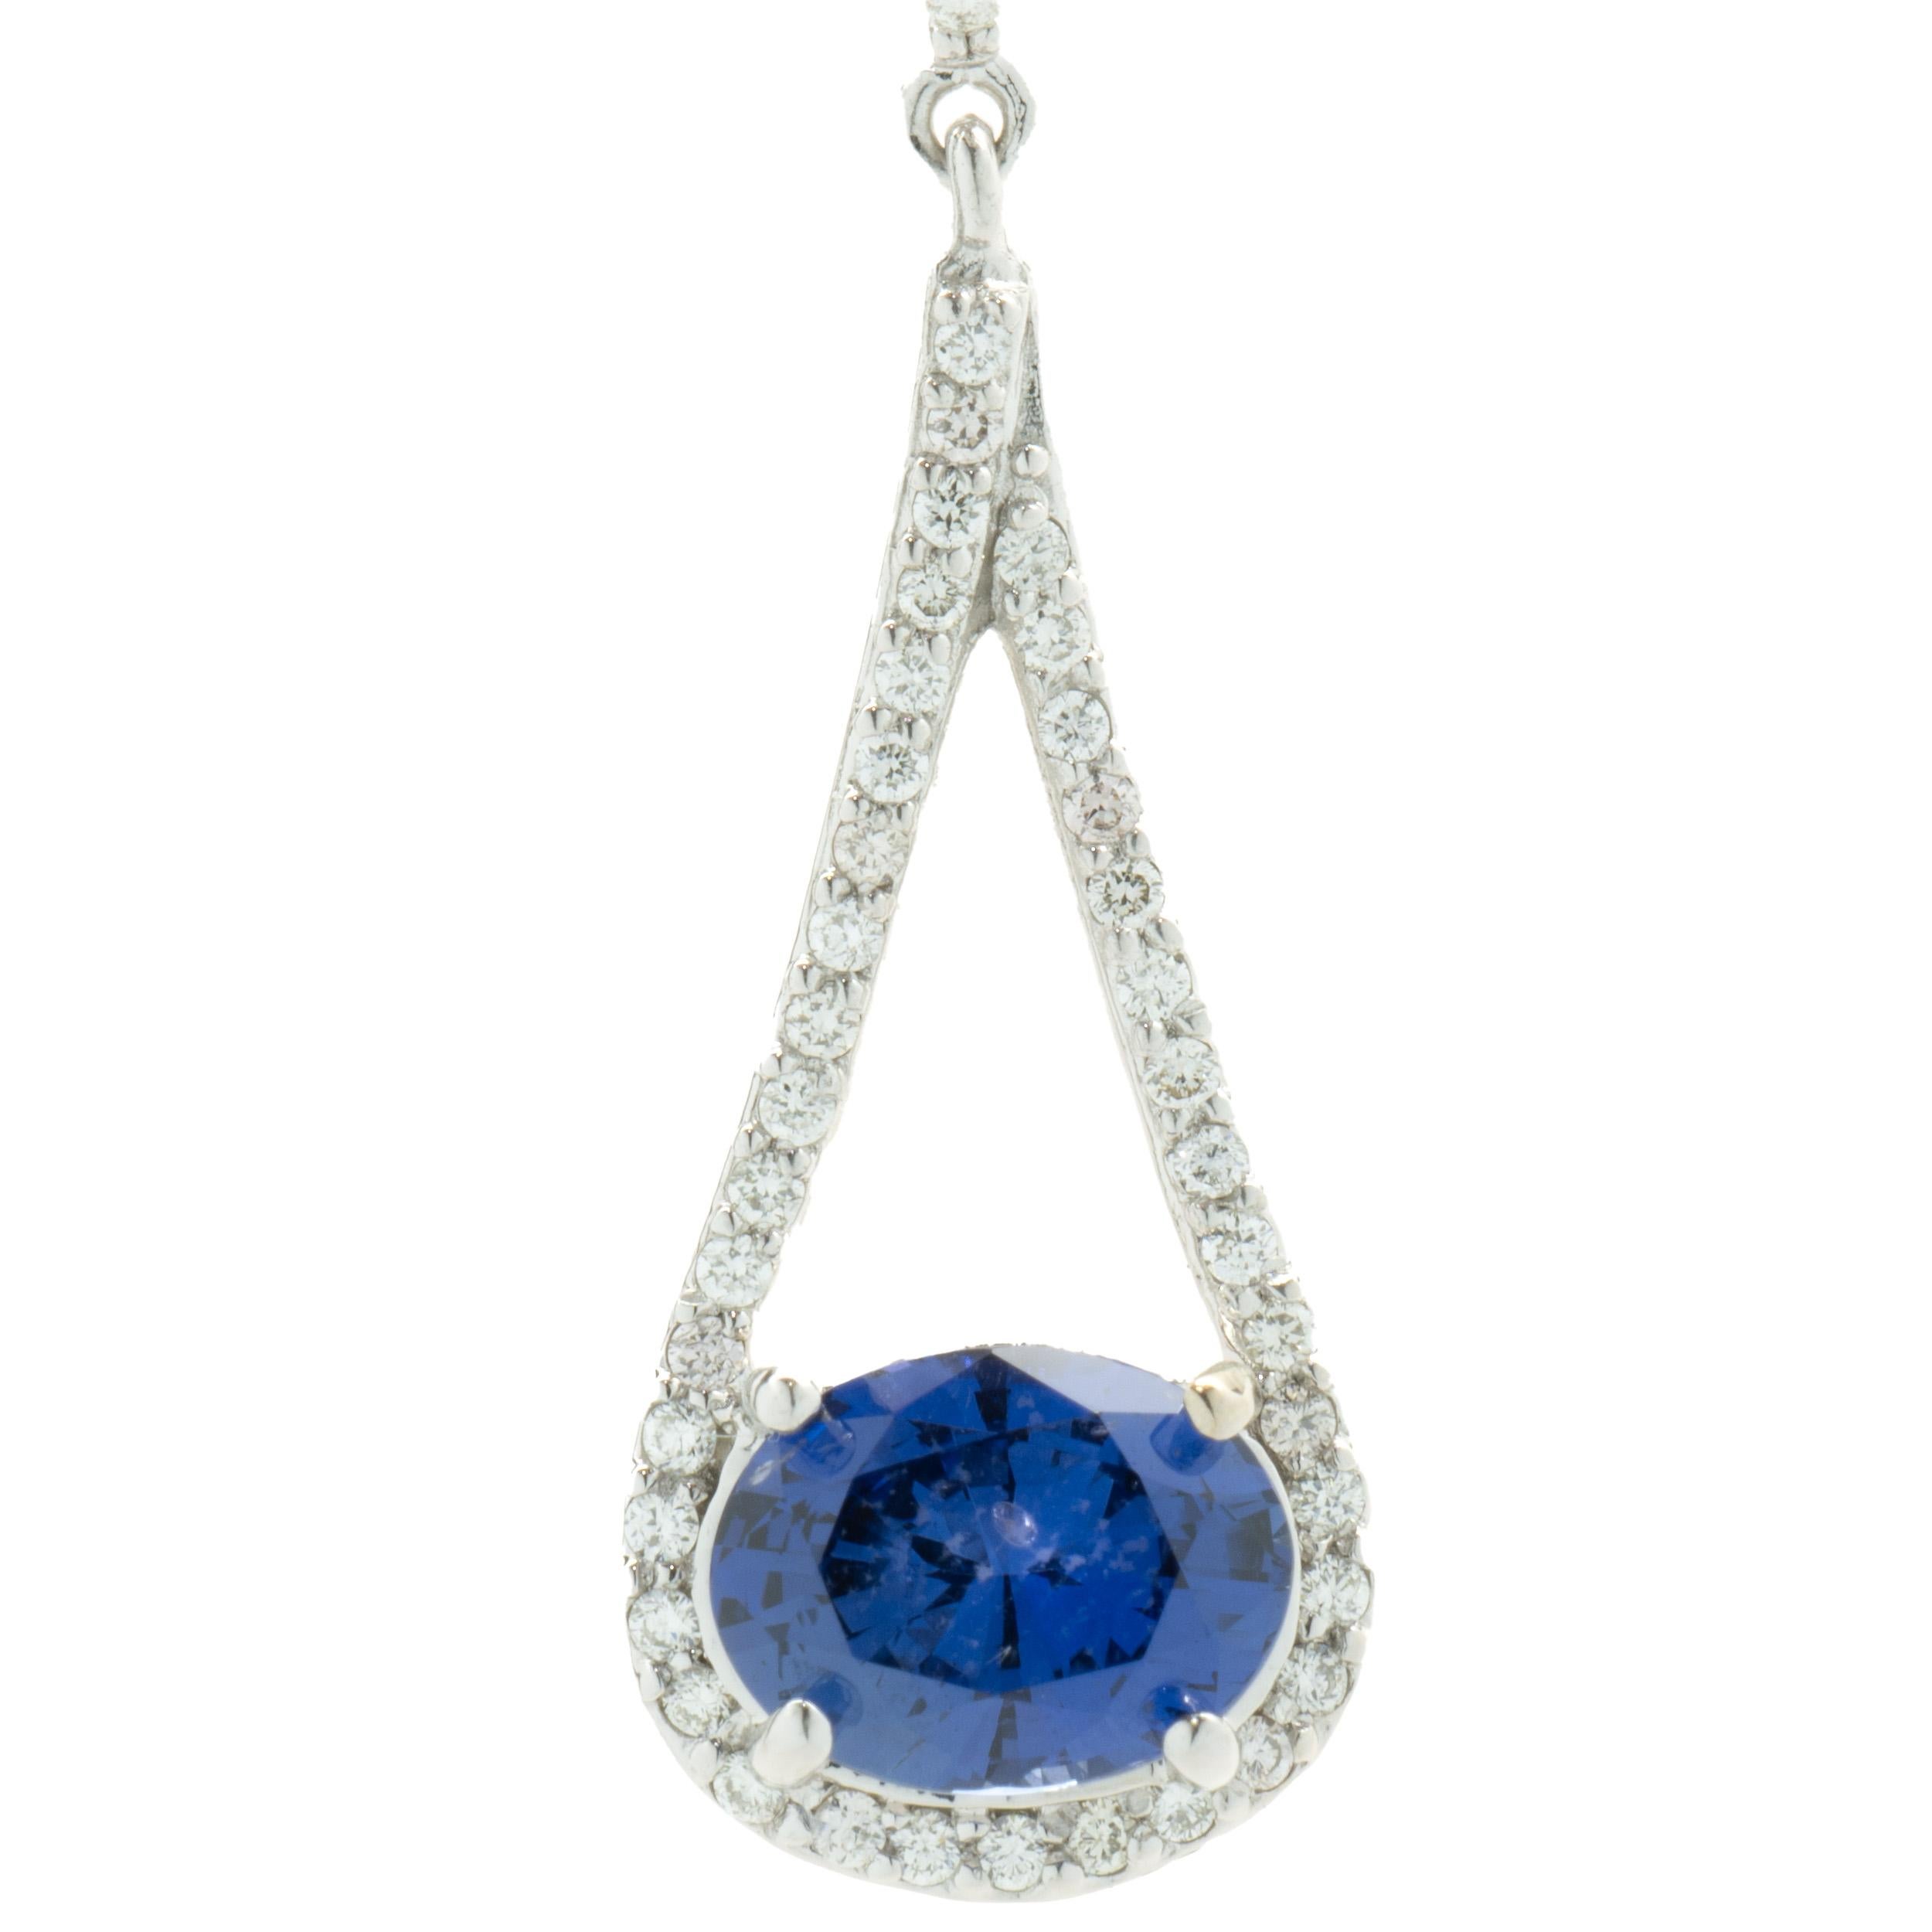 Designer: custom
Material: 14K white gold
Diamond: 44 round brilliant cut = 0.25cttw
Color: H
Clarity: SI1
Sapphire: 1 oval cut = 2.15ct
Dimensions: necklace measures 18-inches in length
Weight: 4.63 grams